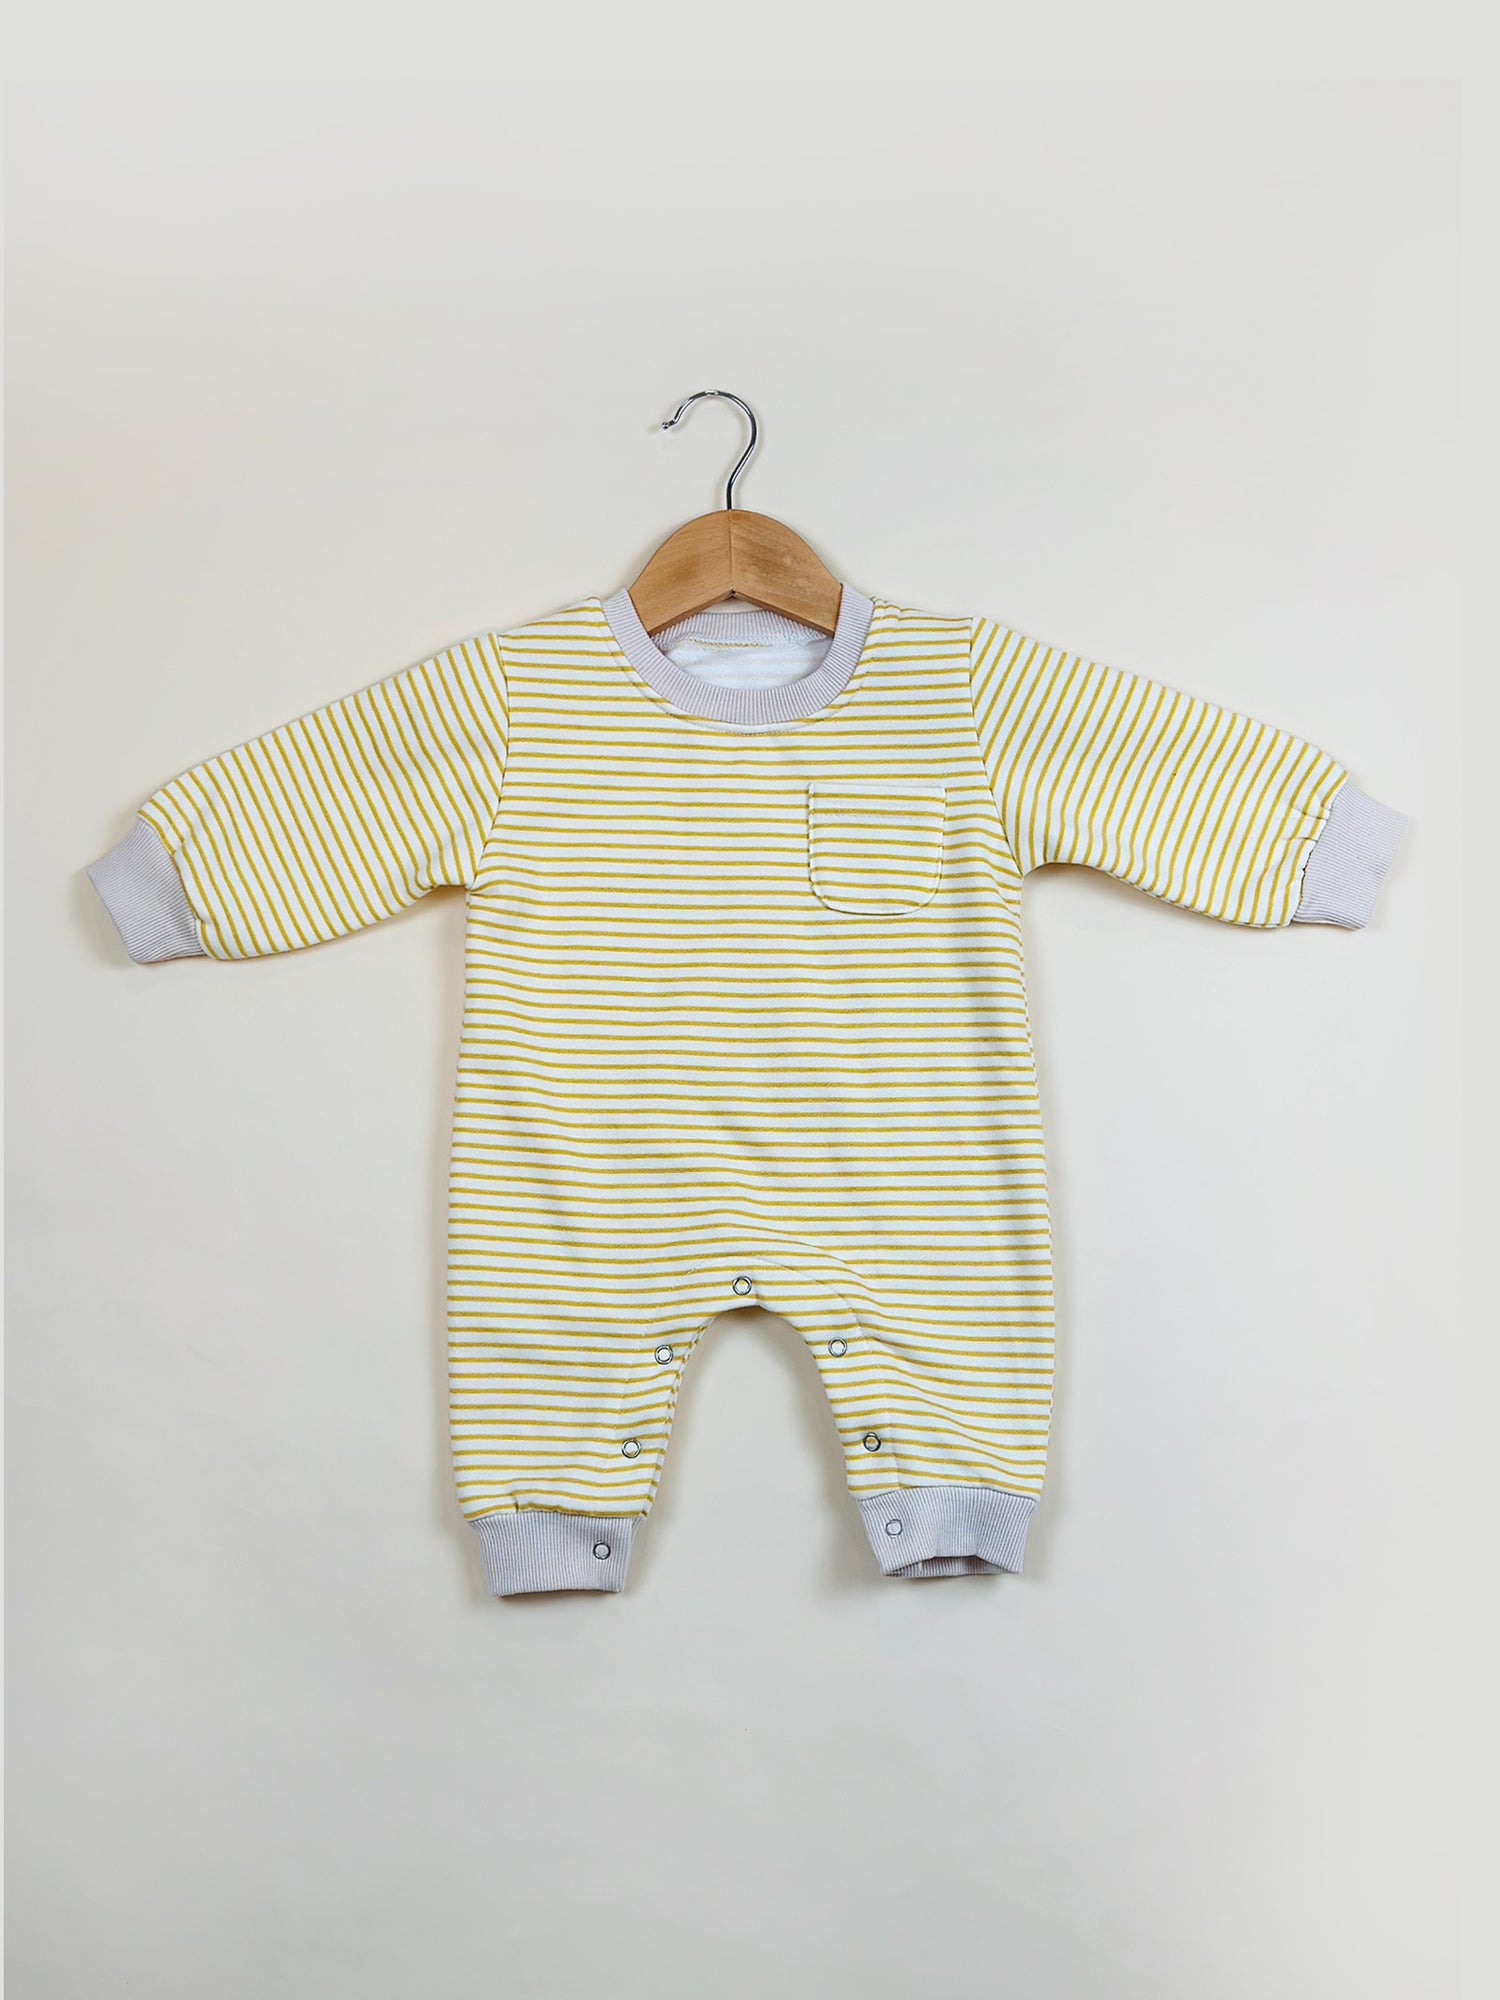 Striped Star Romper lined with Fleece